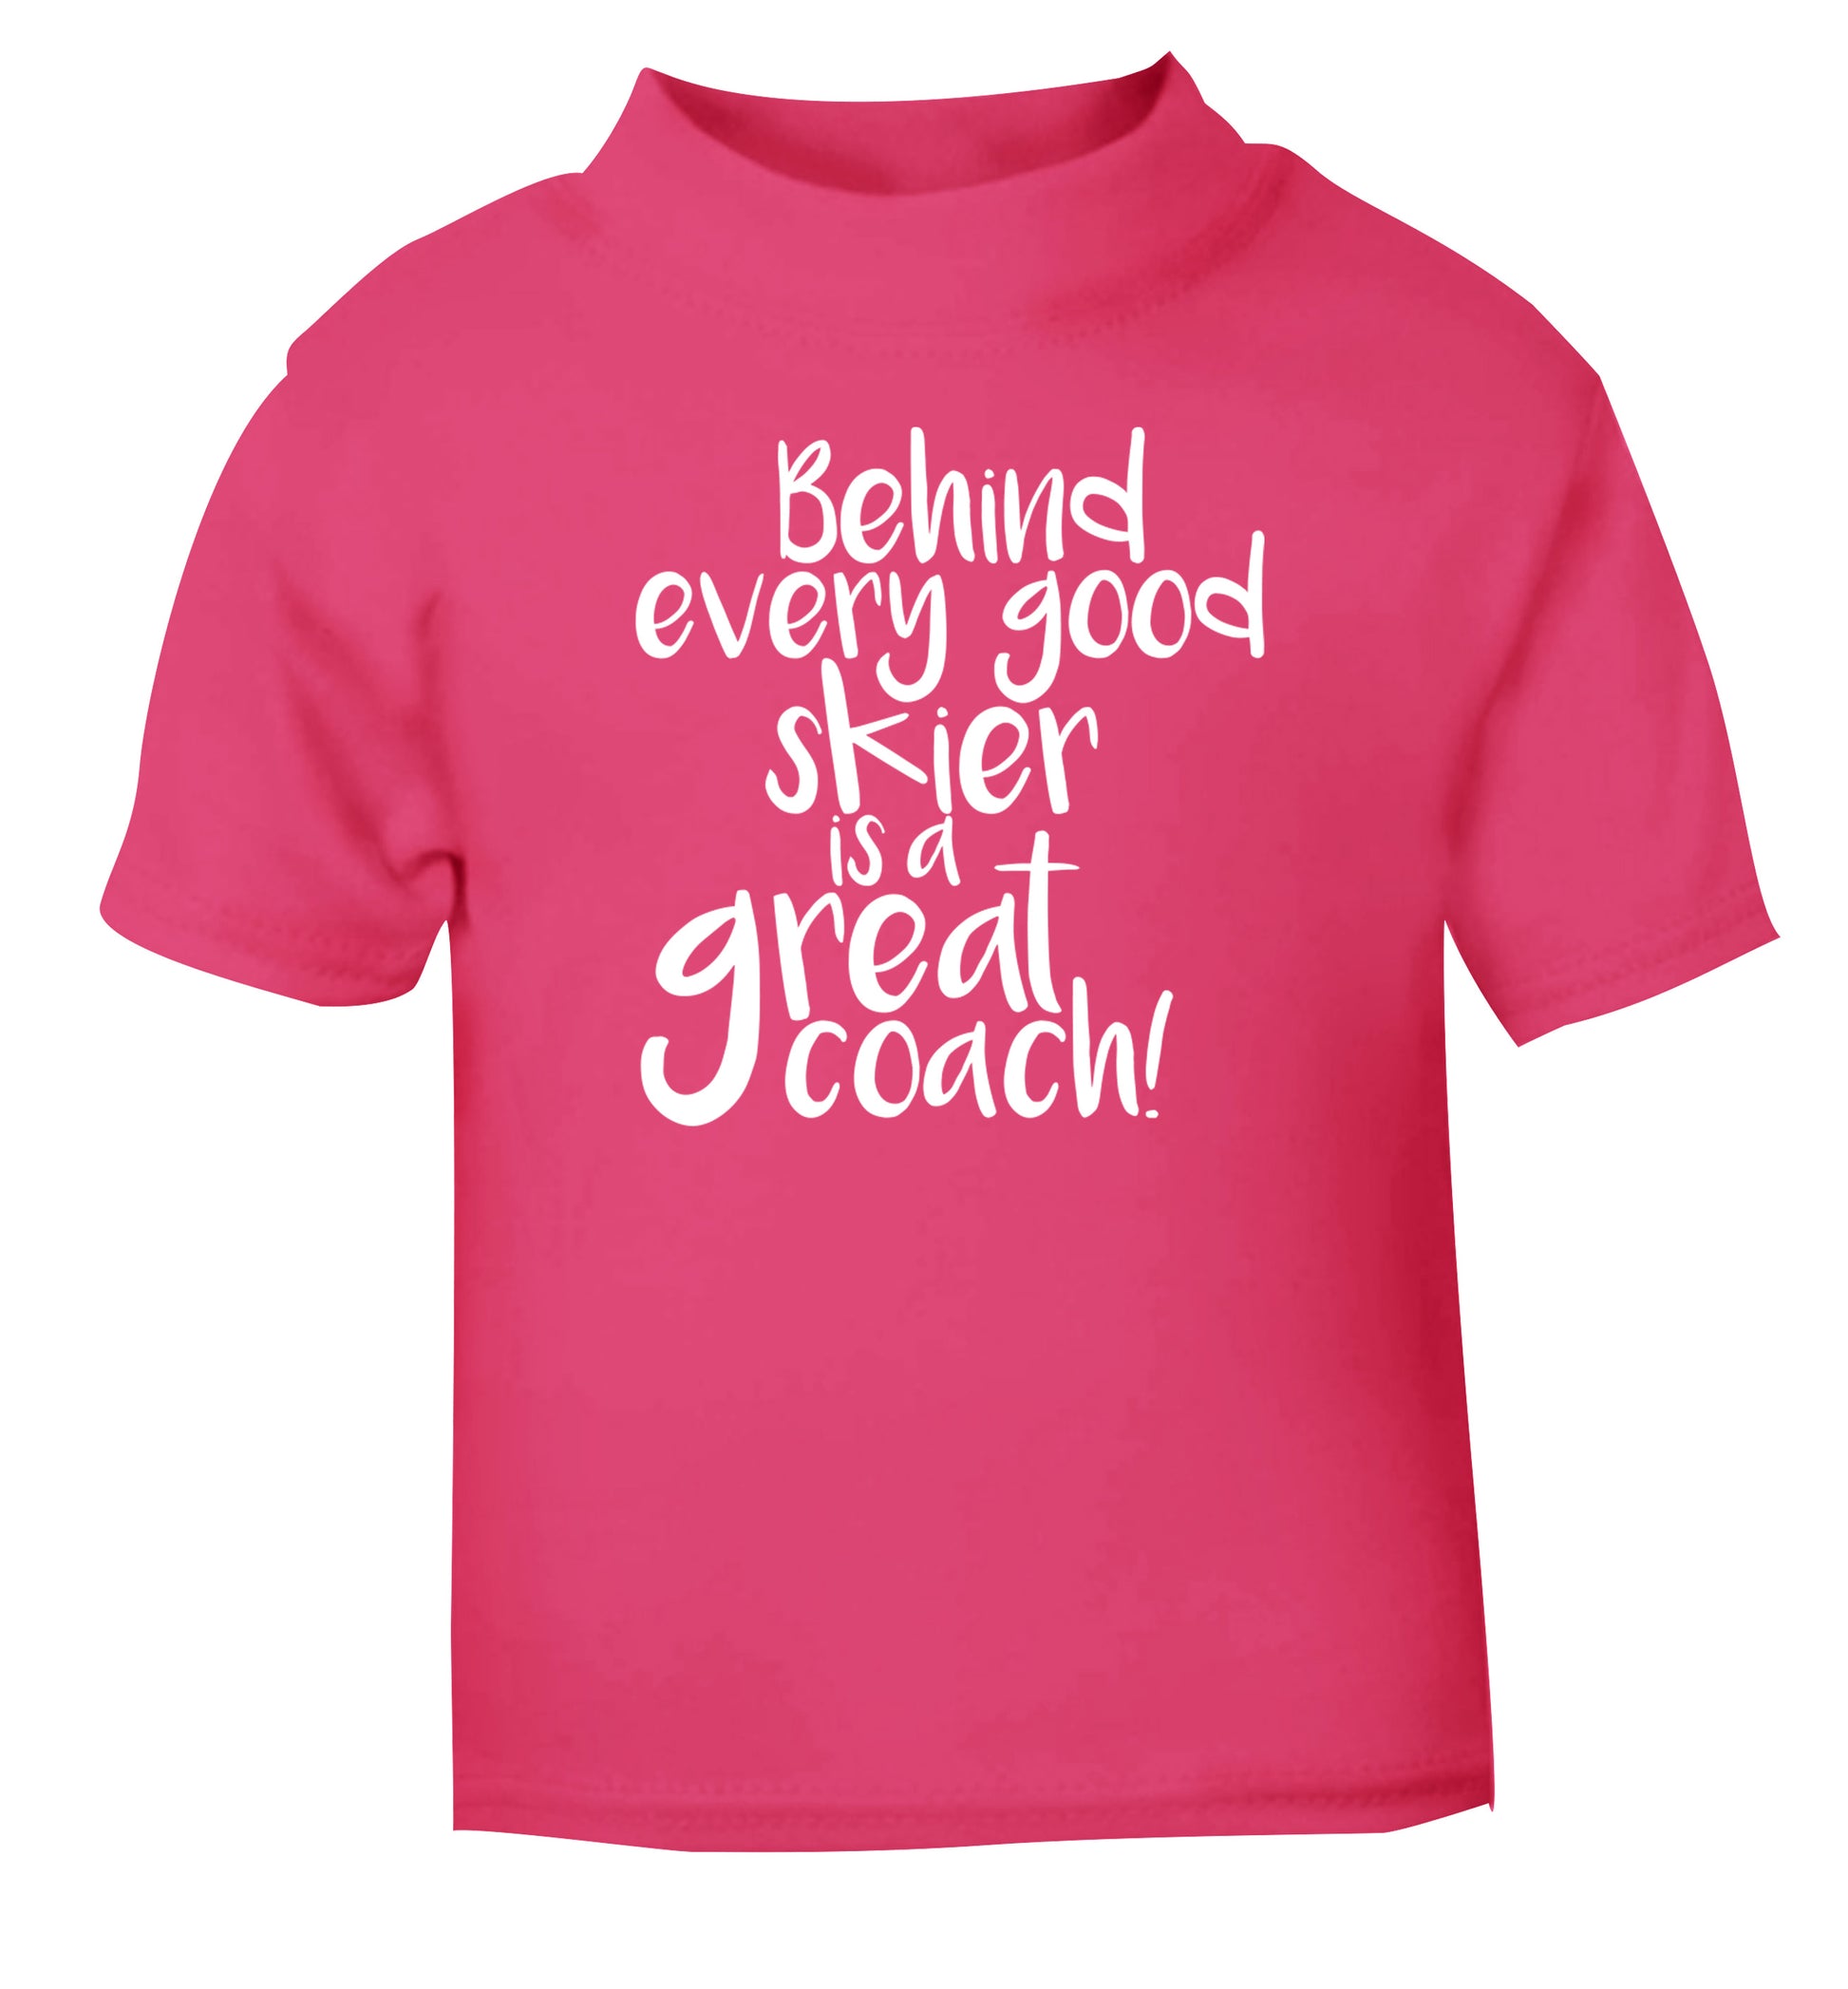 Behind every good skier is a great coach! pink Baby Toddler Tshirt 2 Years